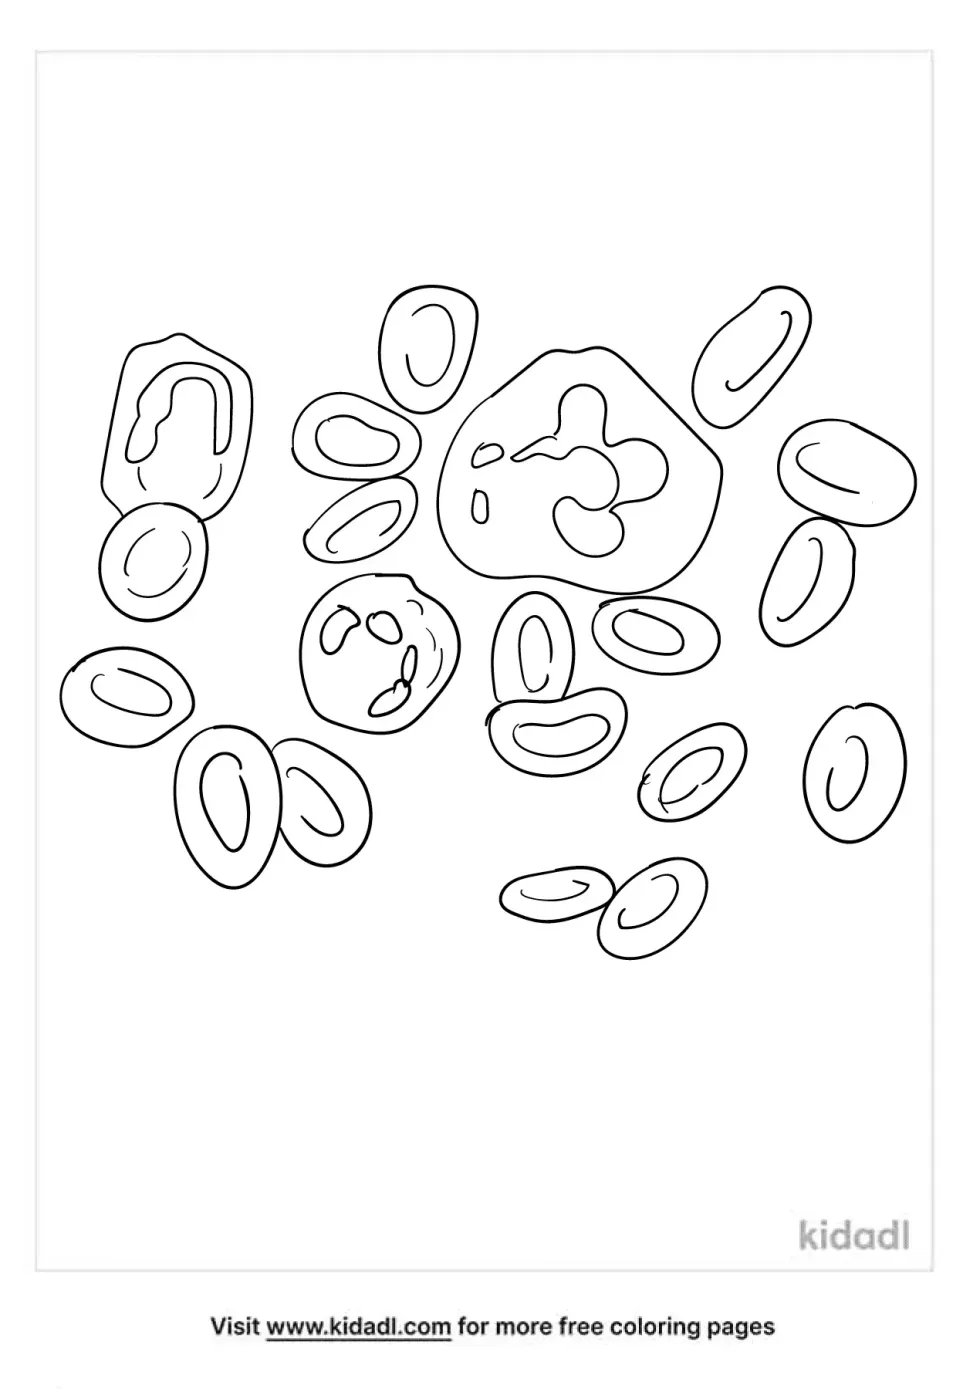 Blood Cells Coloring Page